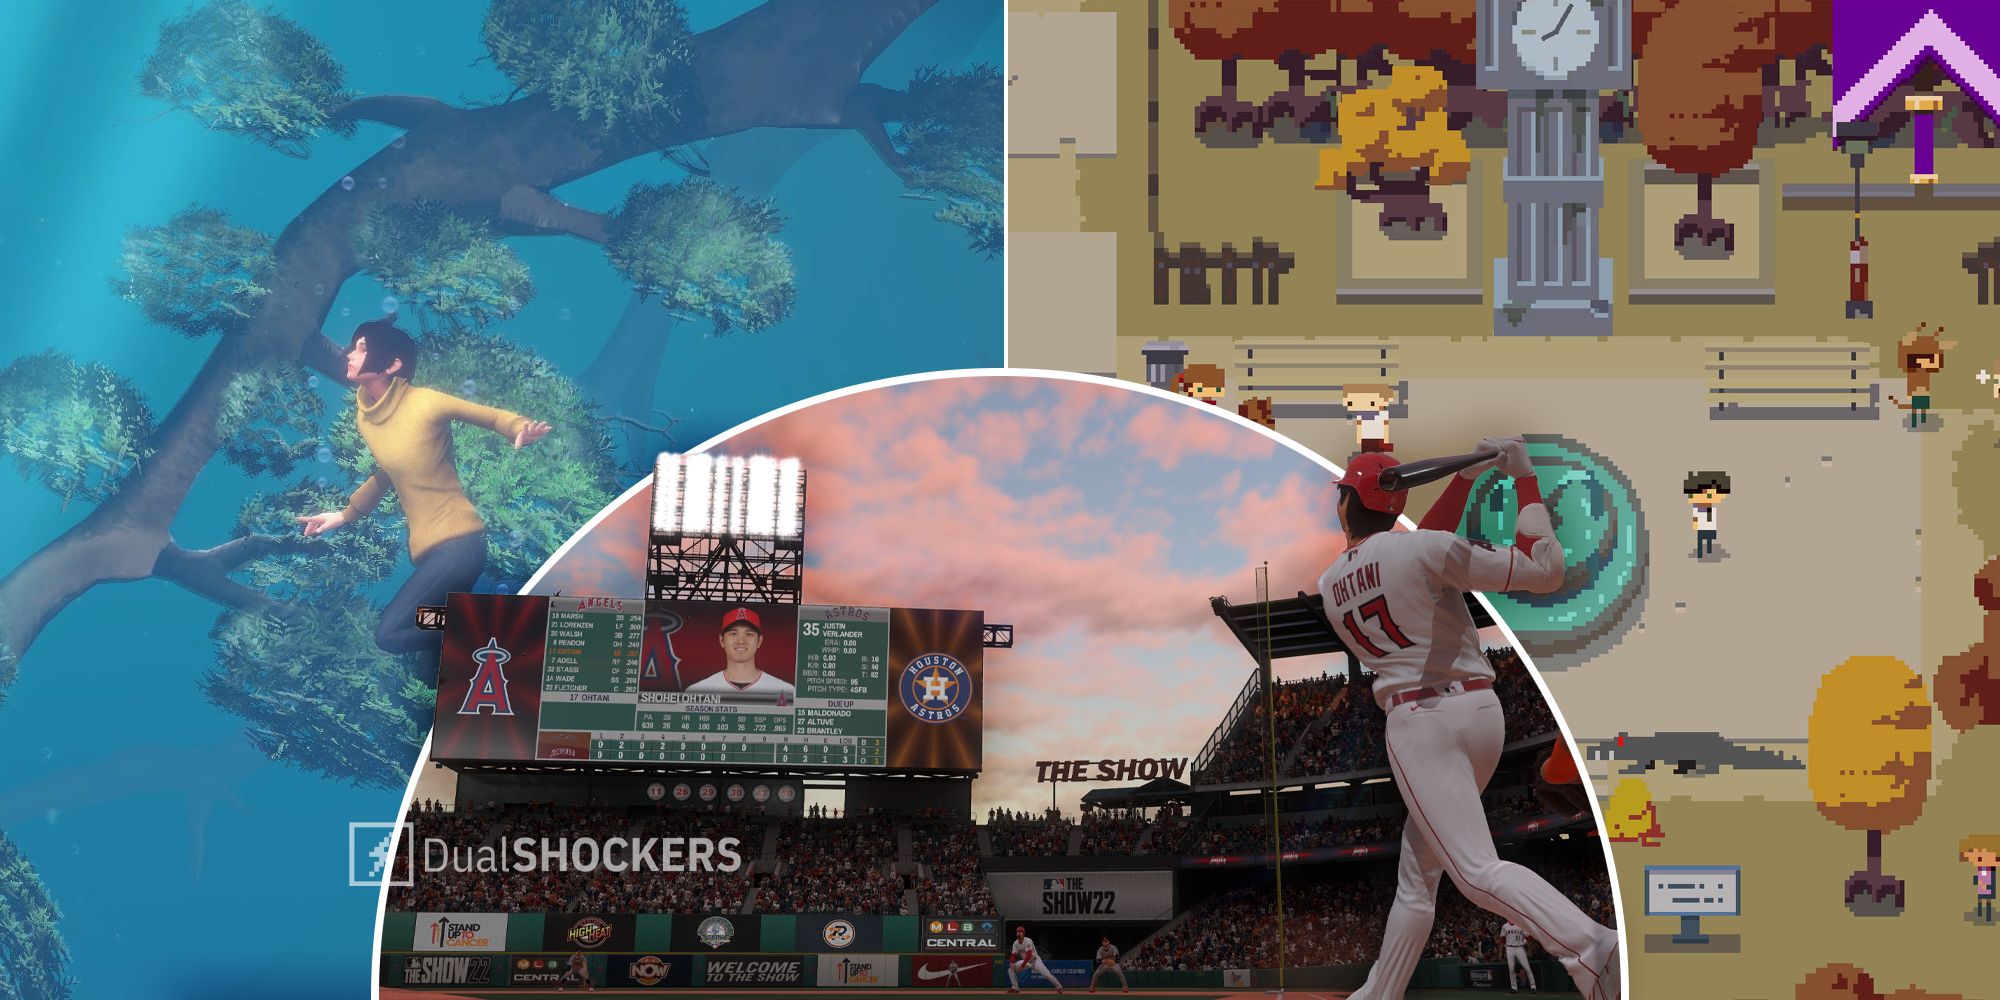 Xbox Game Pass adds Chinatown Detective Agency, MLB The Show 22